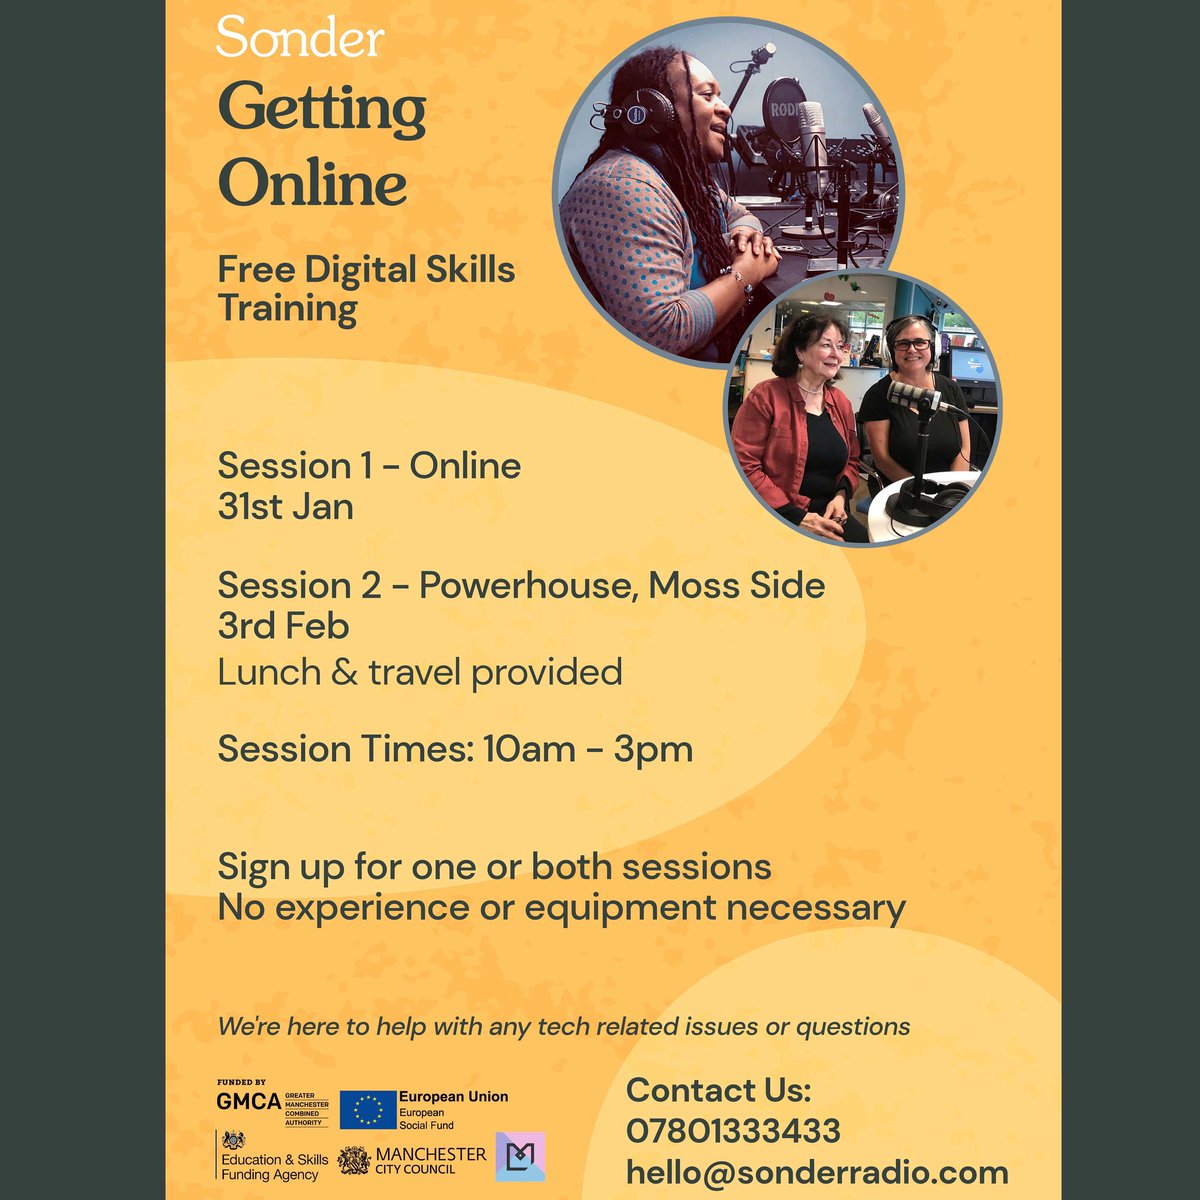 It’s not too late to book onto our Getting Online sessions- tomorrows session is online so call us on 07801333433 or email hello@sonderradio.com to secure your place and get the link! 📻 #sonder #radiocourse #digitalskills